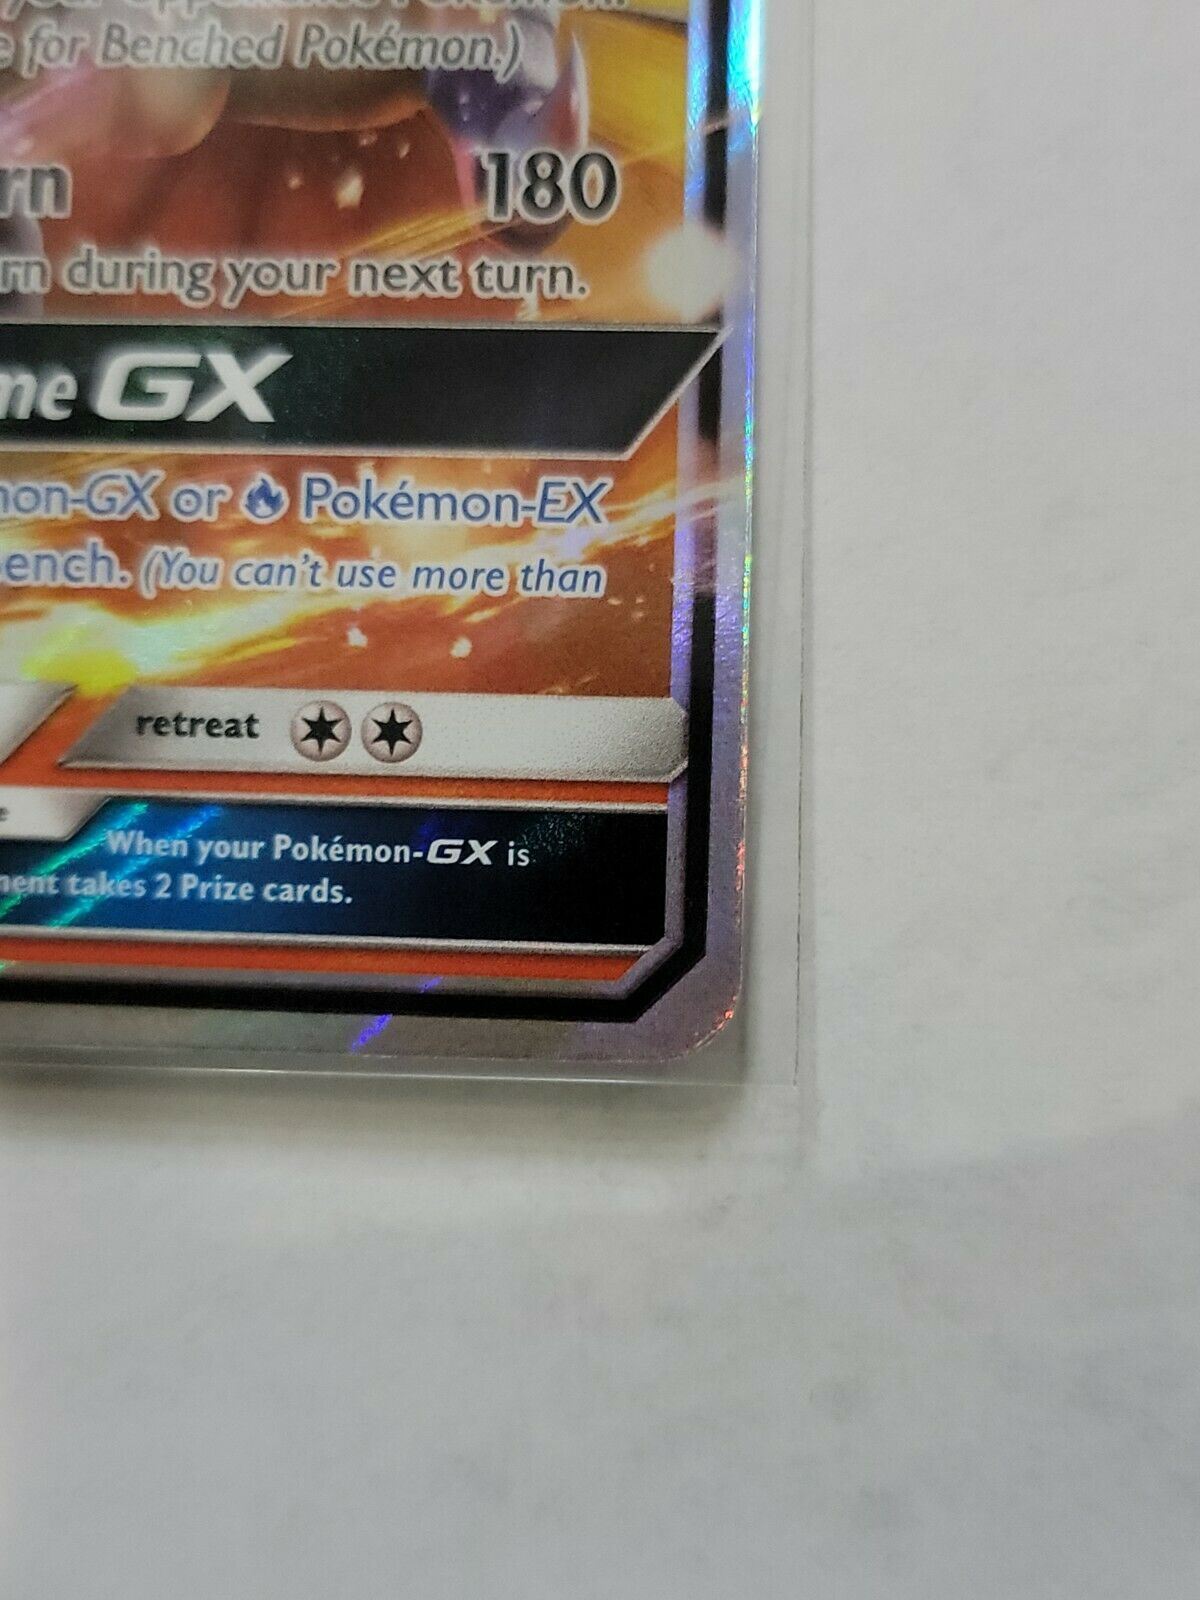 Pokemon Trading Card Game Ho-Oh GX 21/147 : Rare Holo GX Card : SM-03  Burning Shadows - Trading Card Games from Hills Cards UK